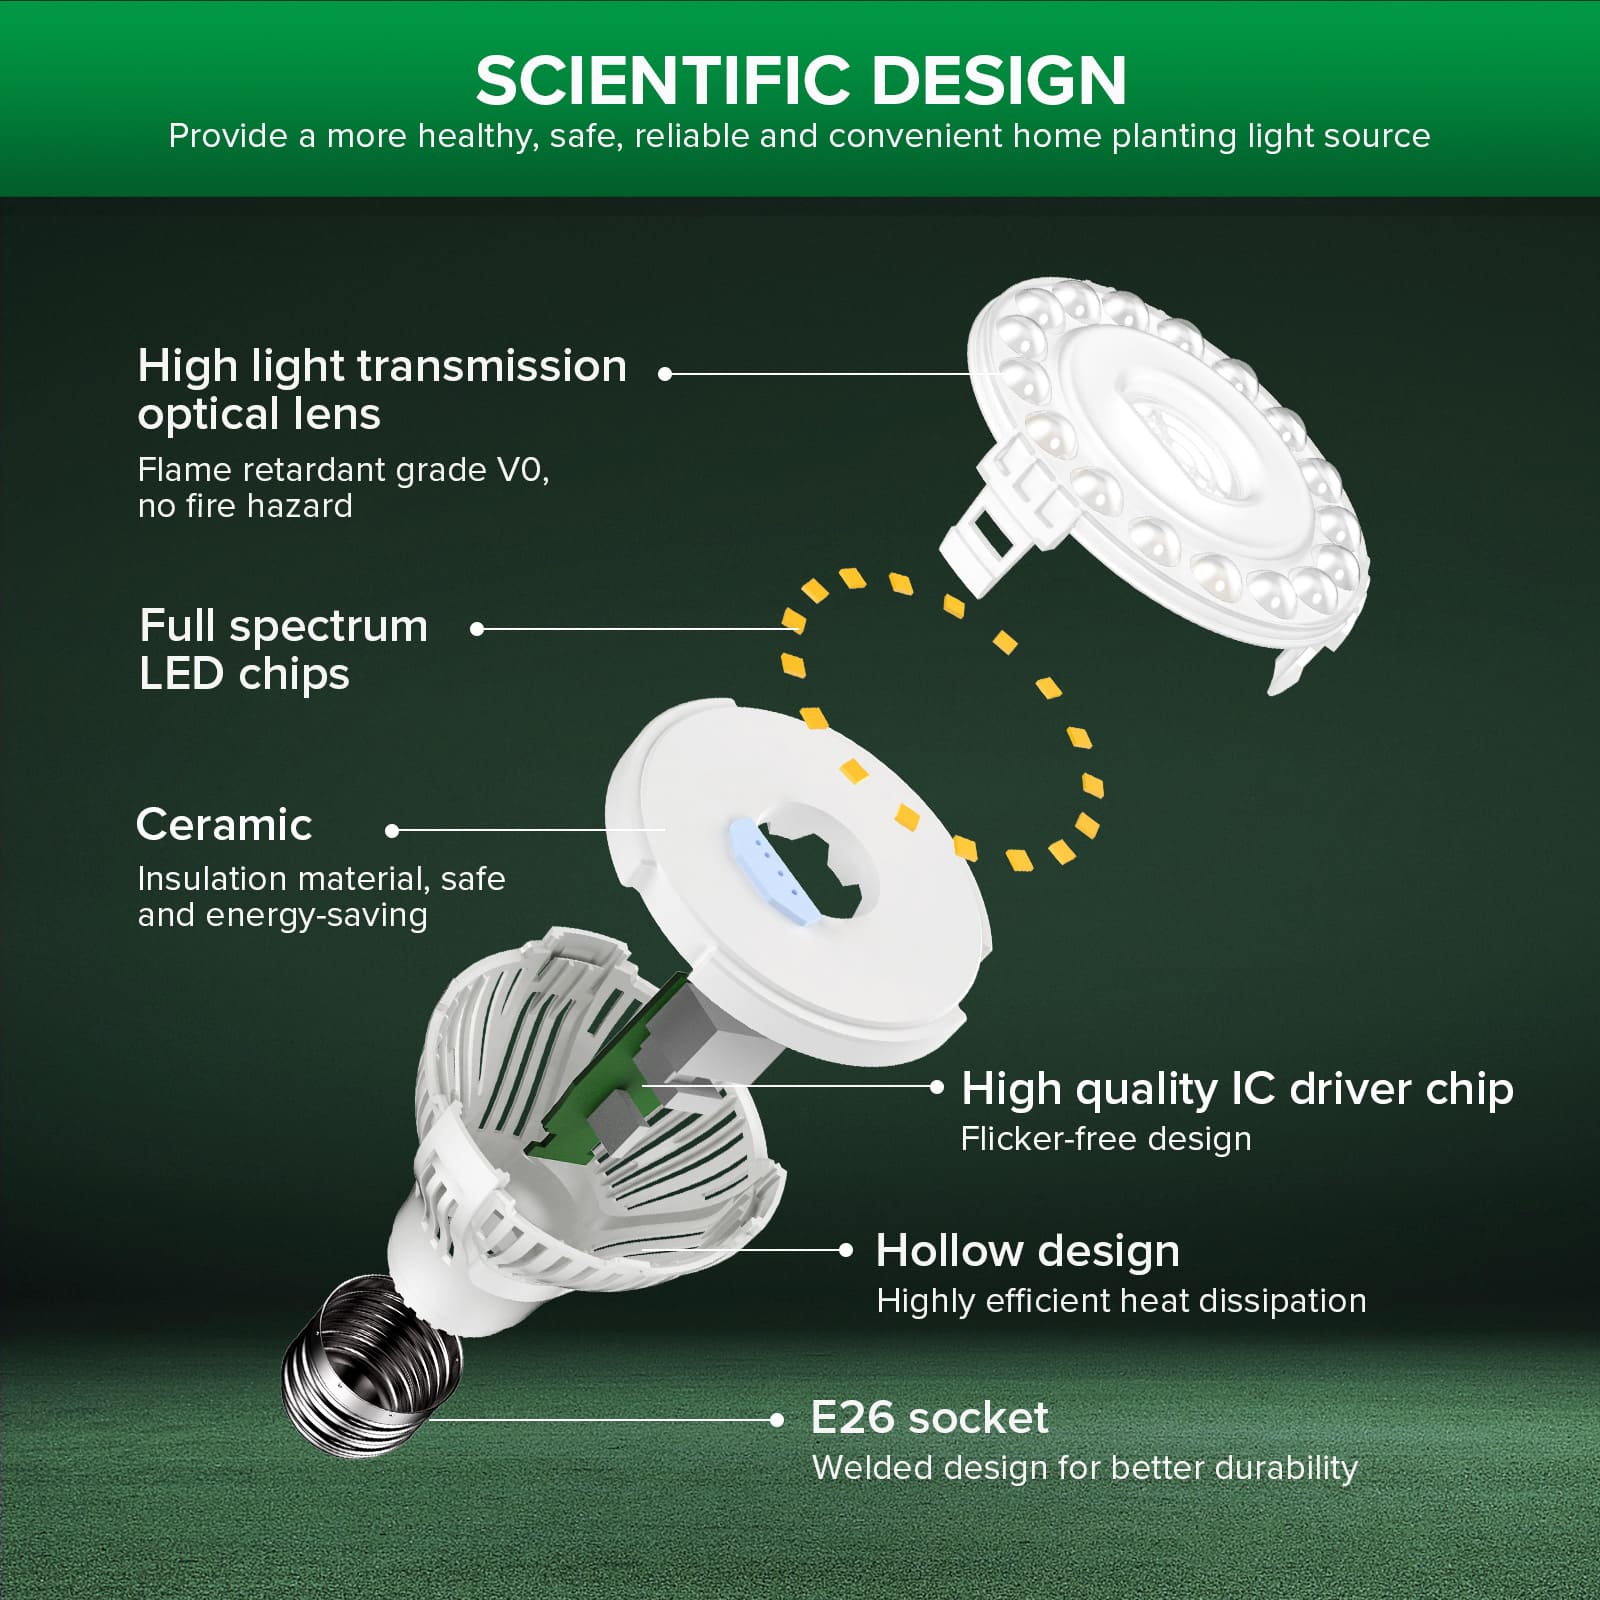 SCIENTIFIC DESIGN：Provide a more healthy, safe, reliable and convenient home planting light source.